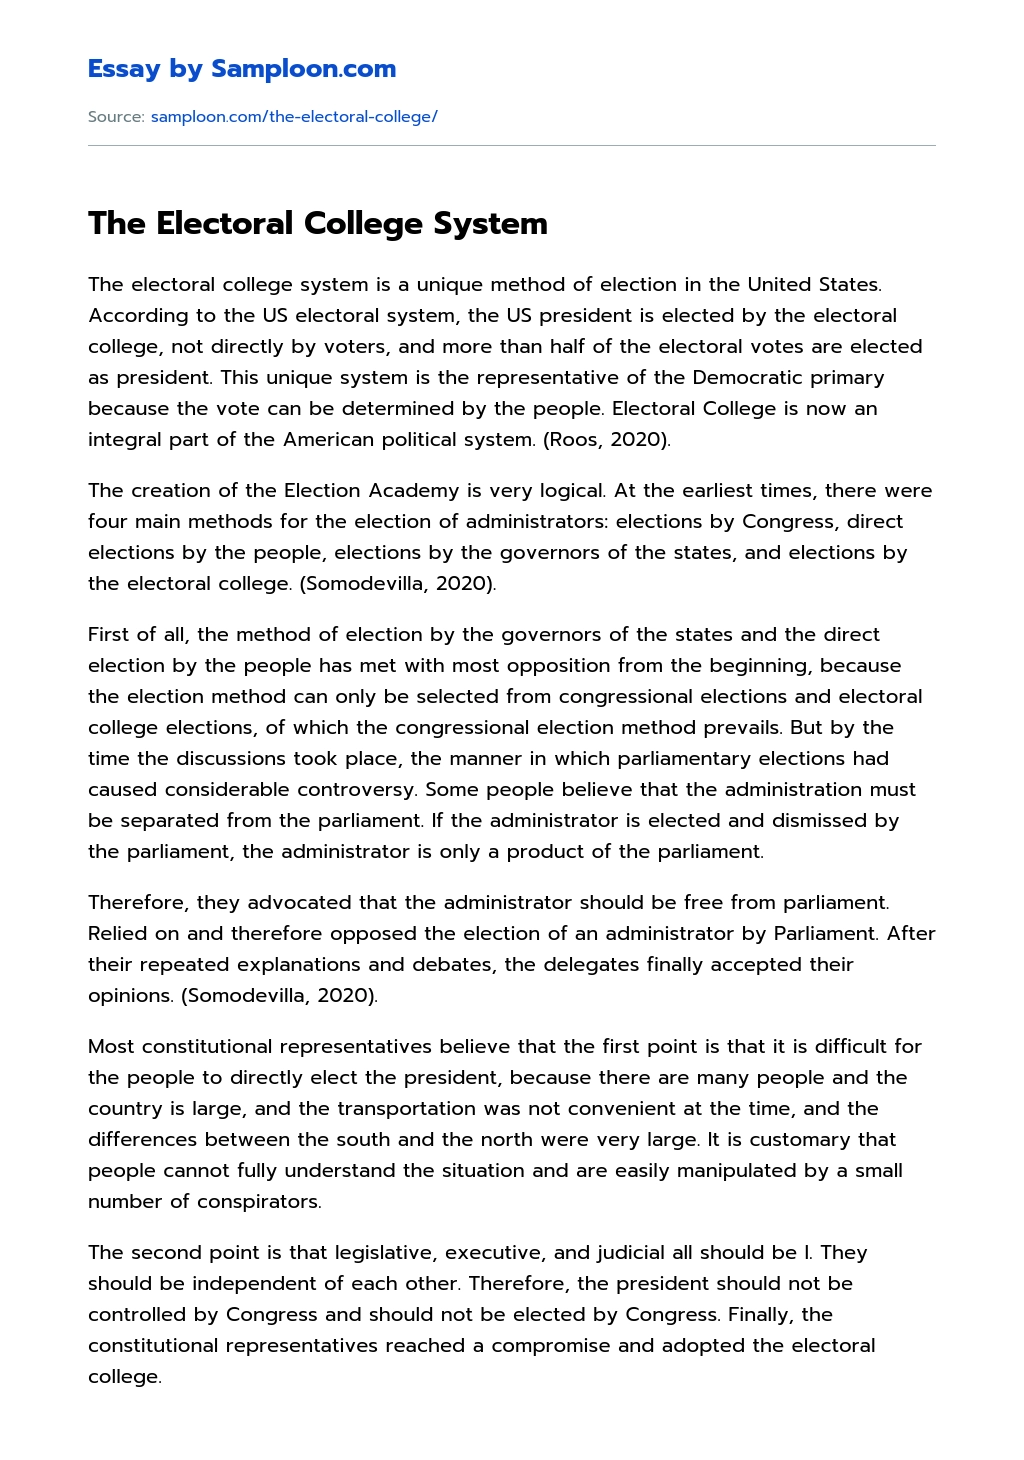 The Electoral College System essay